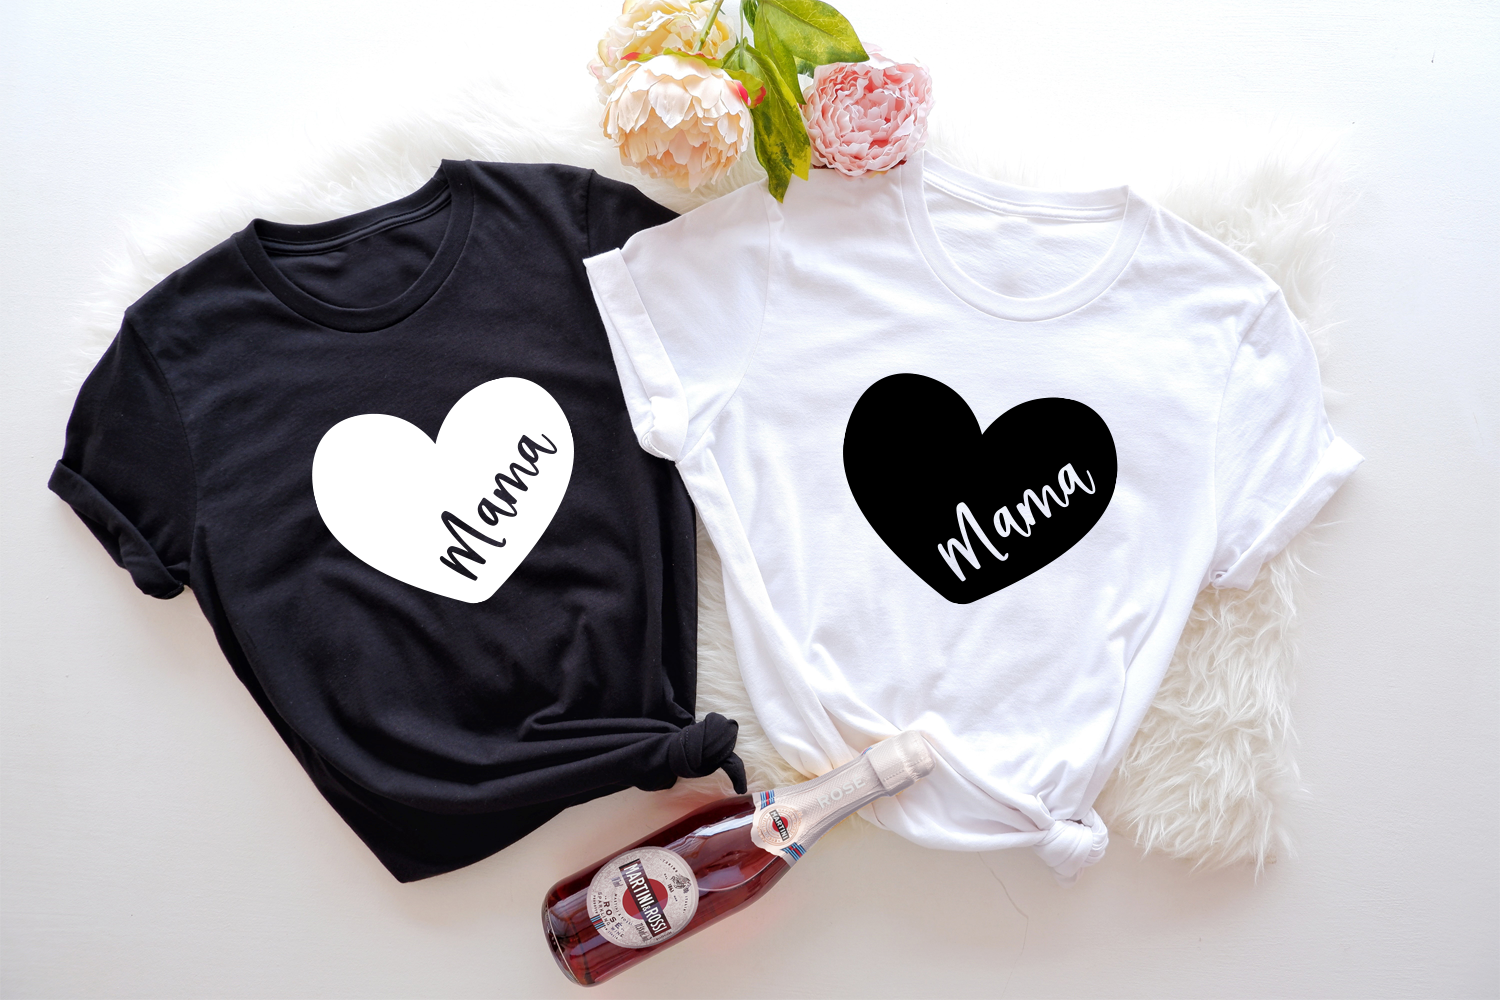 Cute Mama T-shirt: A charming and adorable tee for every mom.